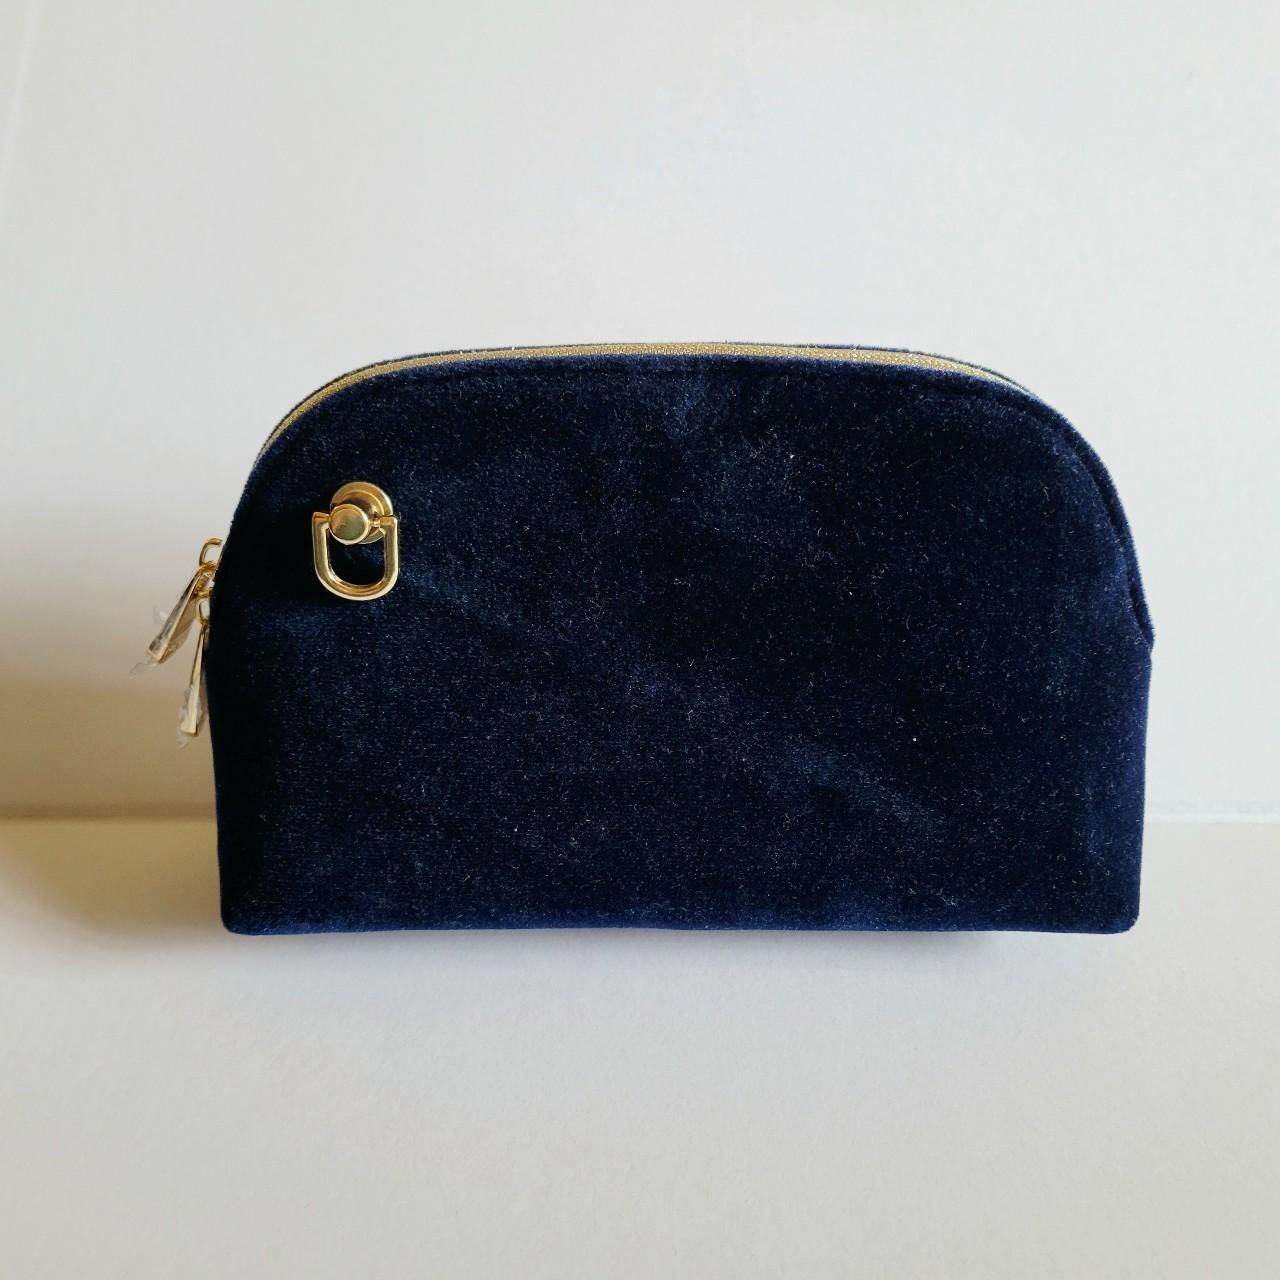 Dior Women's Navy and Gold Bag (2)